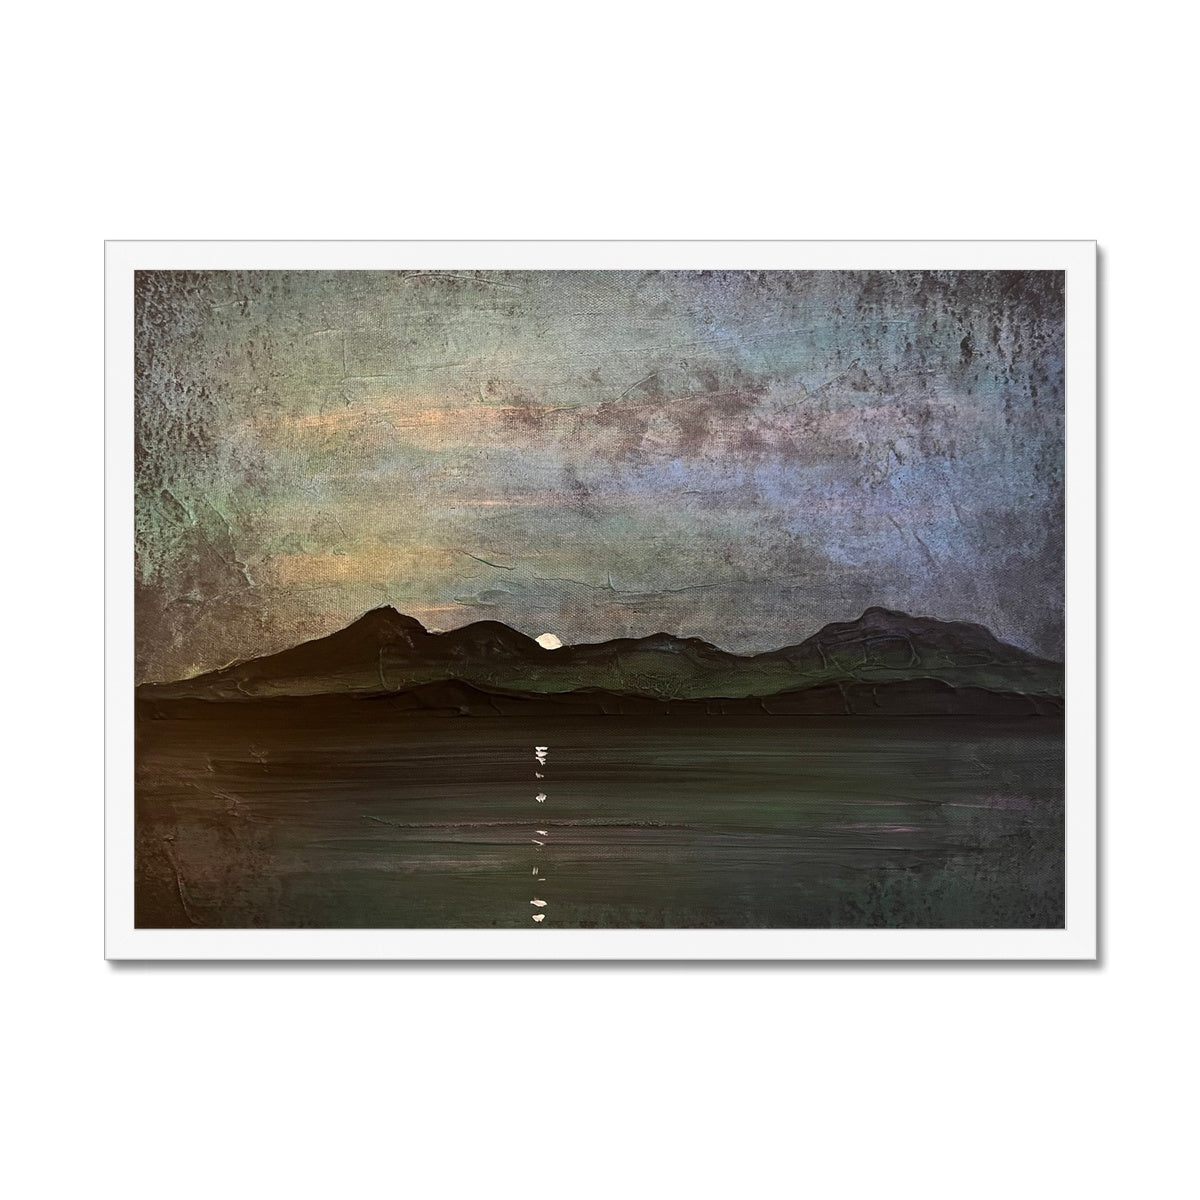 Sleeping Warrior Moonlight Arran Painting | Framed Prints From Scotland-Framed Prints-Arran Art Gallery-A2 Landscape-White Frame-Paintings, Prints, Homeware, Art Gifts From Scotland By Scottish Artist Kevin Hunter